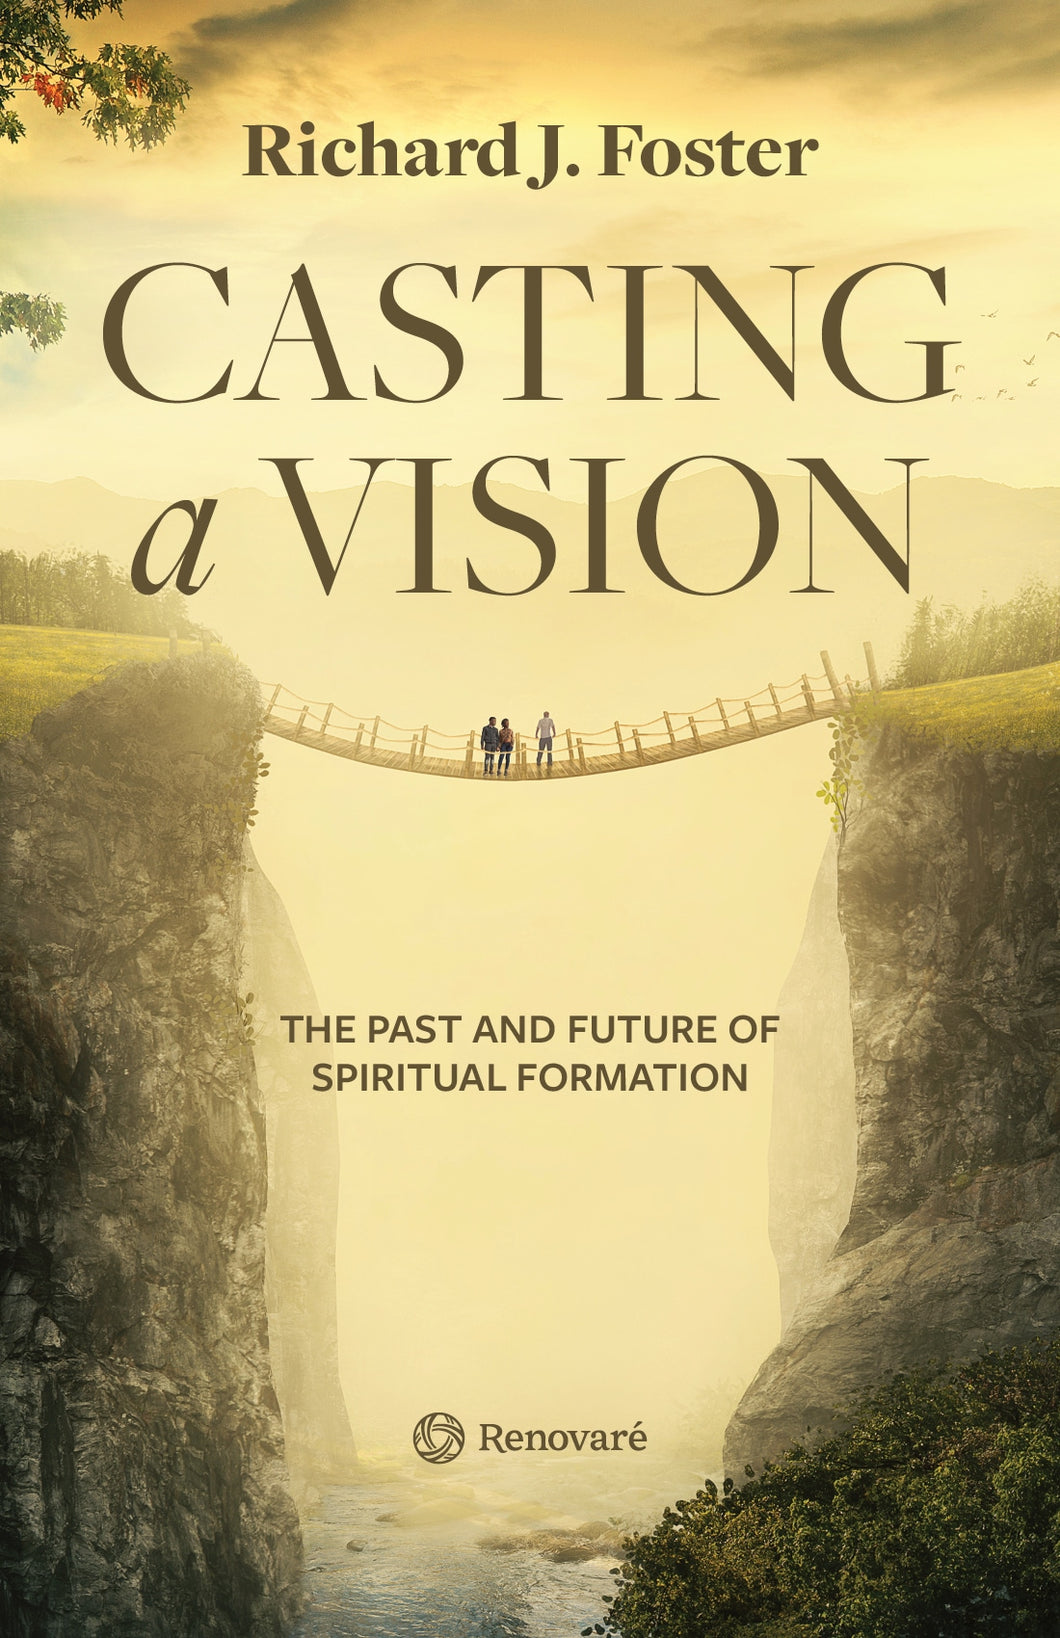 Casting a Vision: The Past and Future of Spiritual Formation by Richard J. Foster (Bulk)